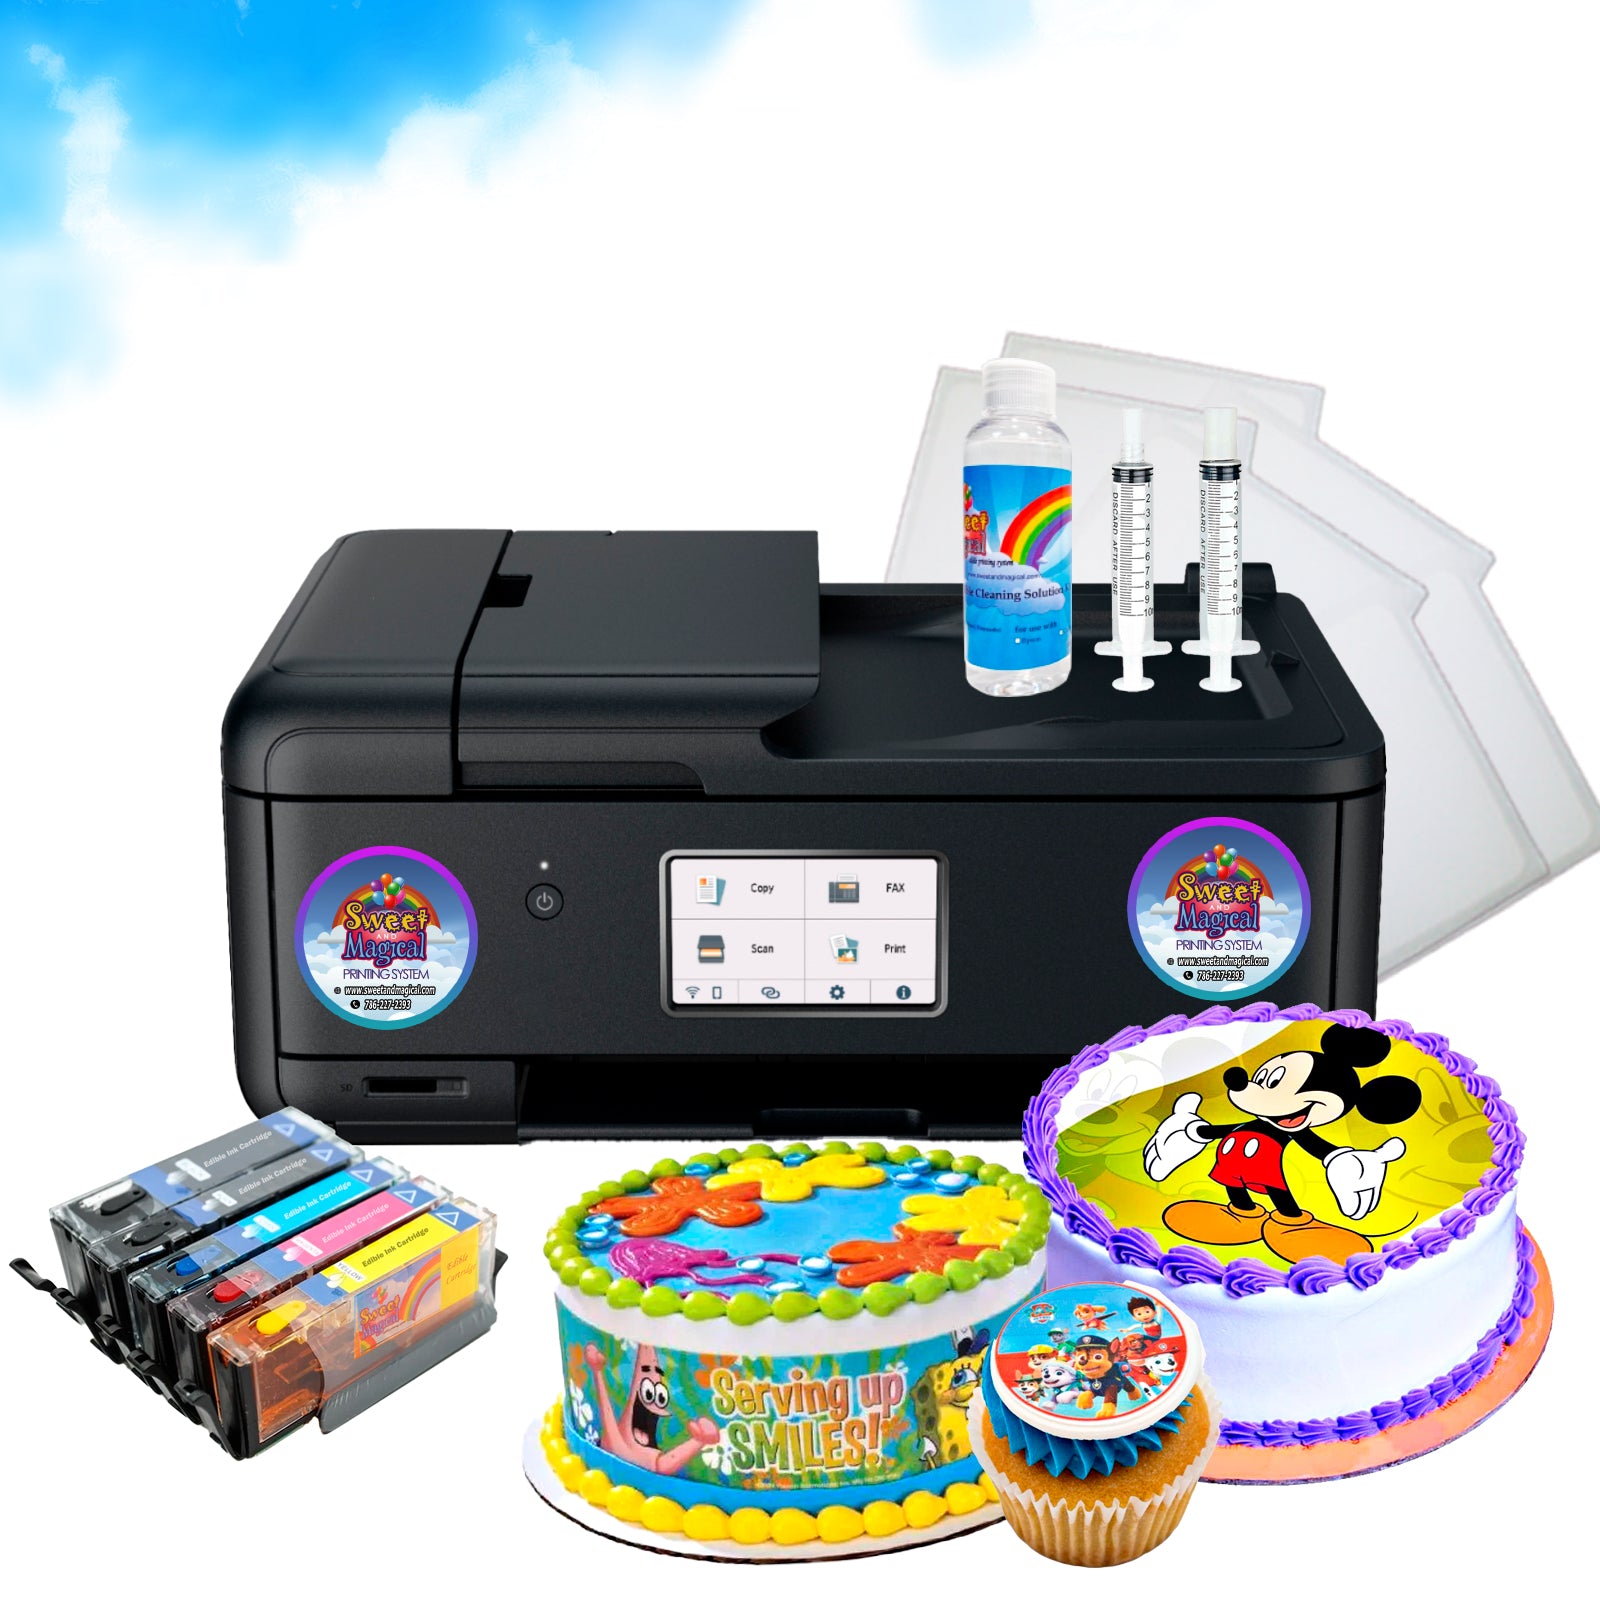 Canon Pixma TS705 Printer With Edible Ink Cartridges & 25 A4 Size Sugar  Sheet by Cake Craft Company